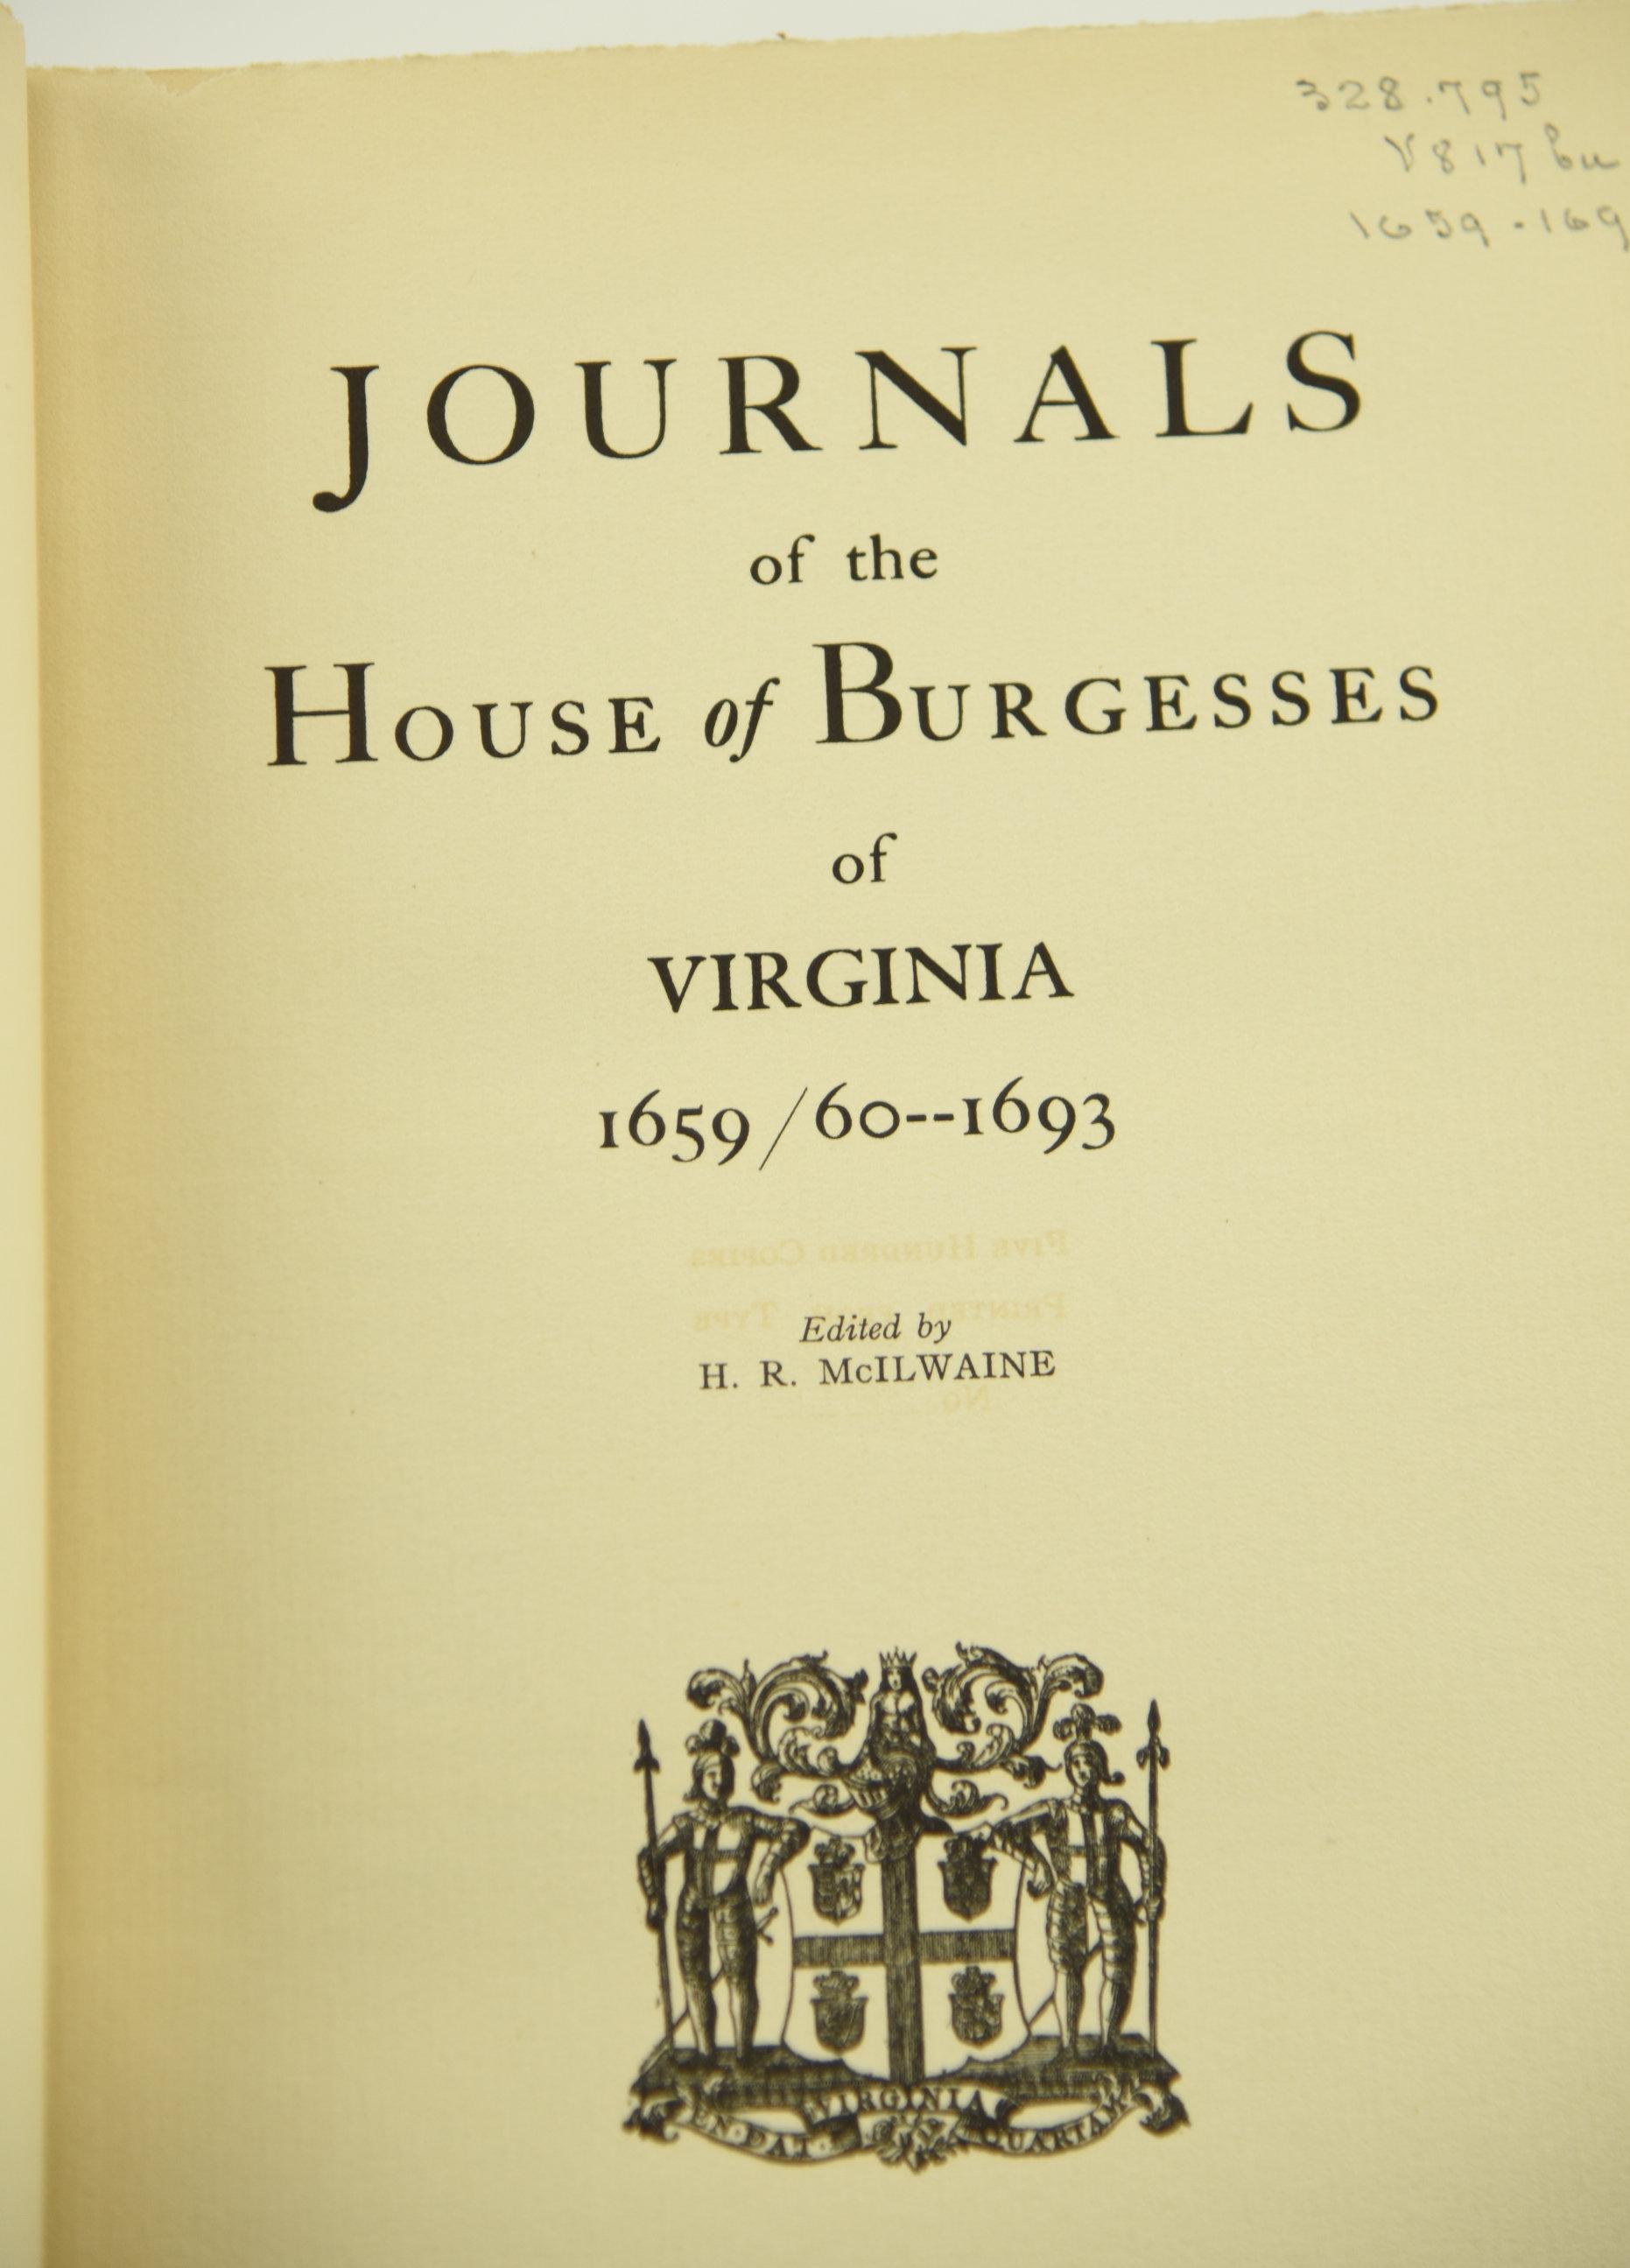 Lot #655 - 16 Volume Set of “Journals of the House of Burgesses of Virginia” Series Covers Dates